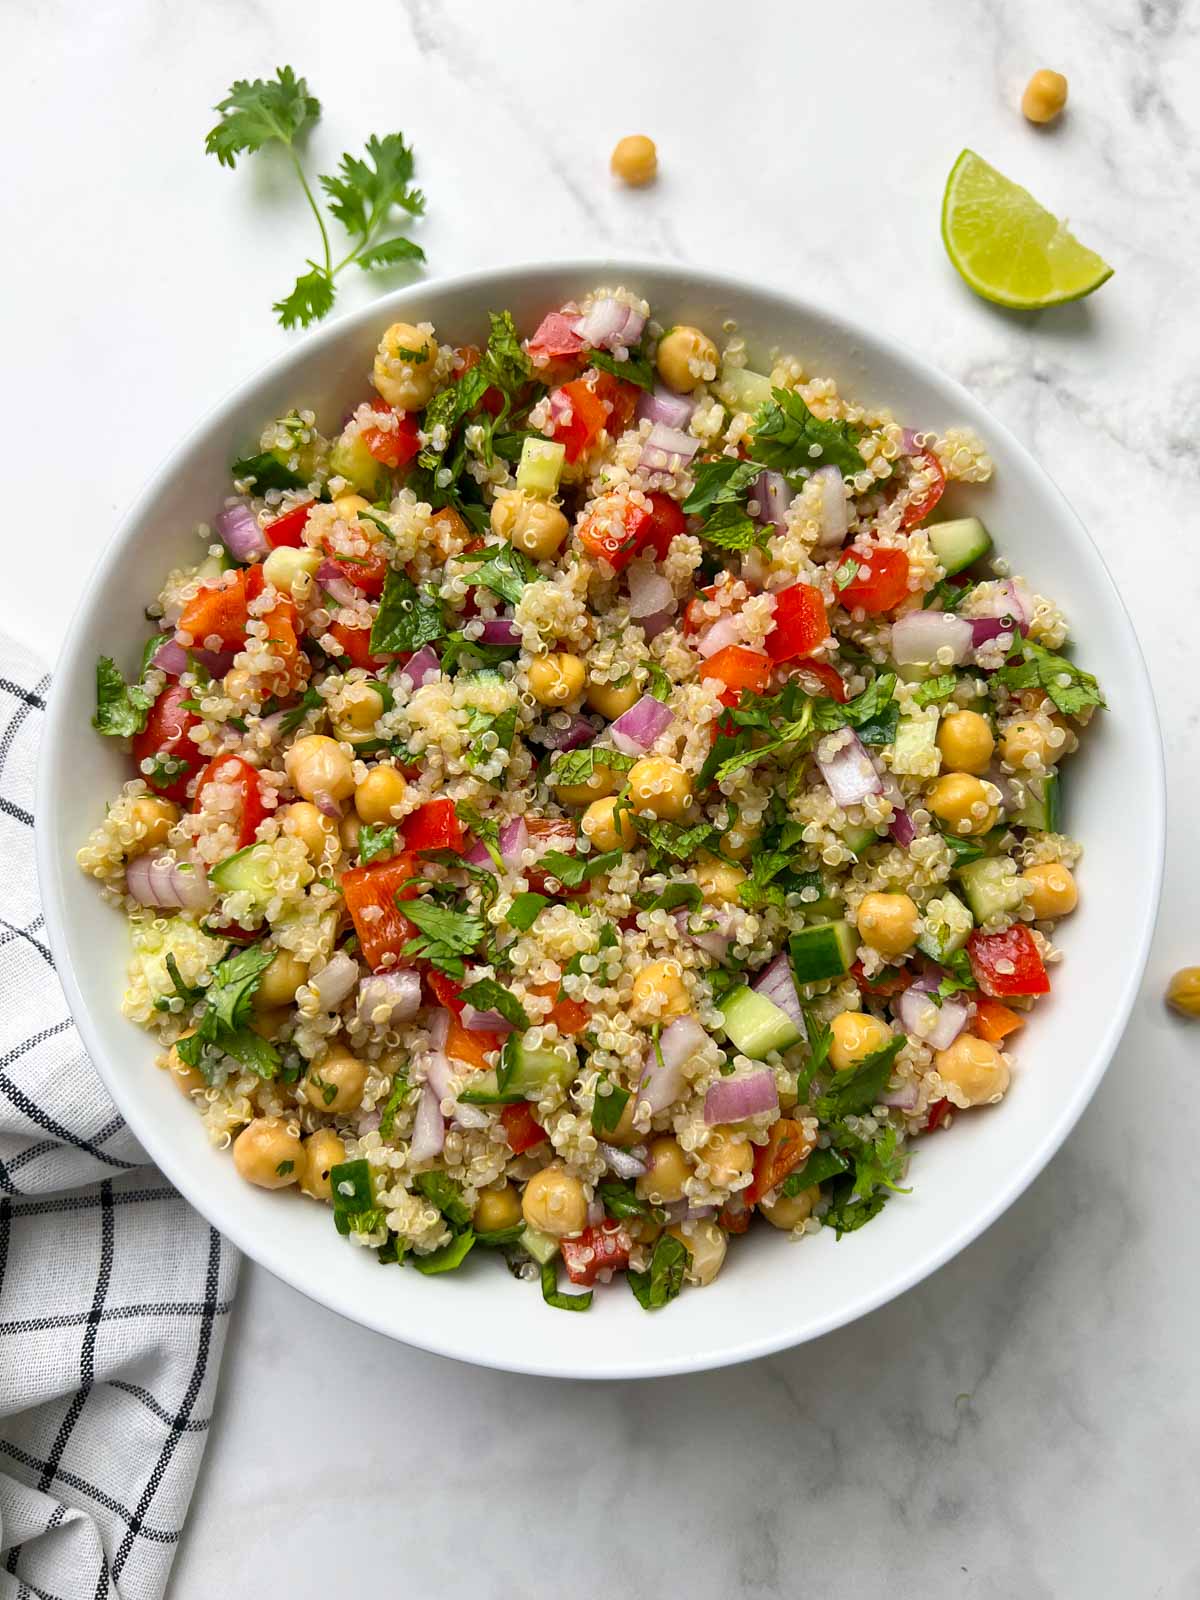 chickpea quinoa salad serve din a large white bowl garnished with herbs and lime wedge on the side